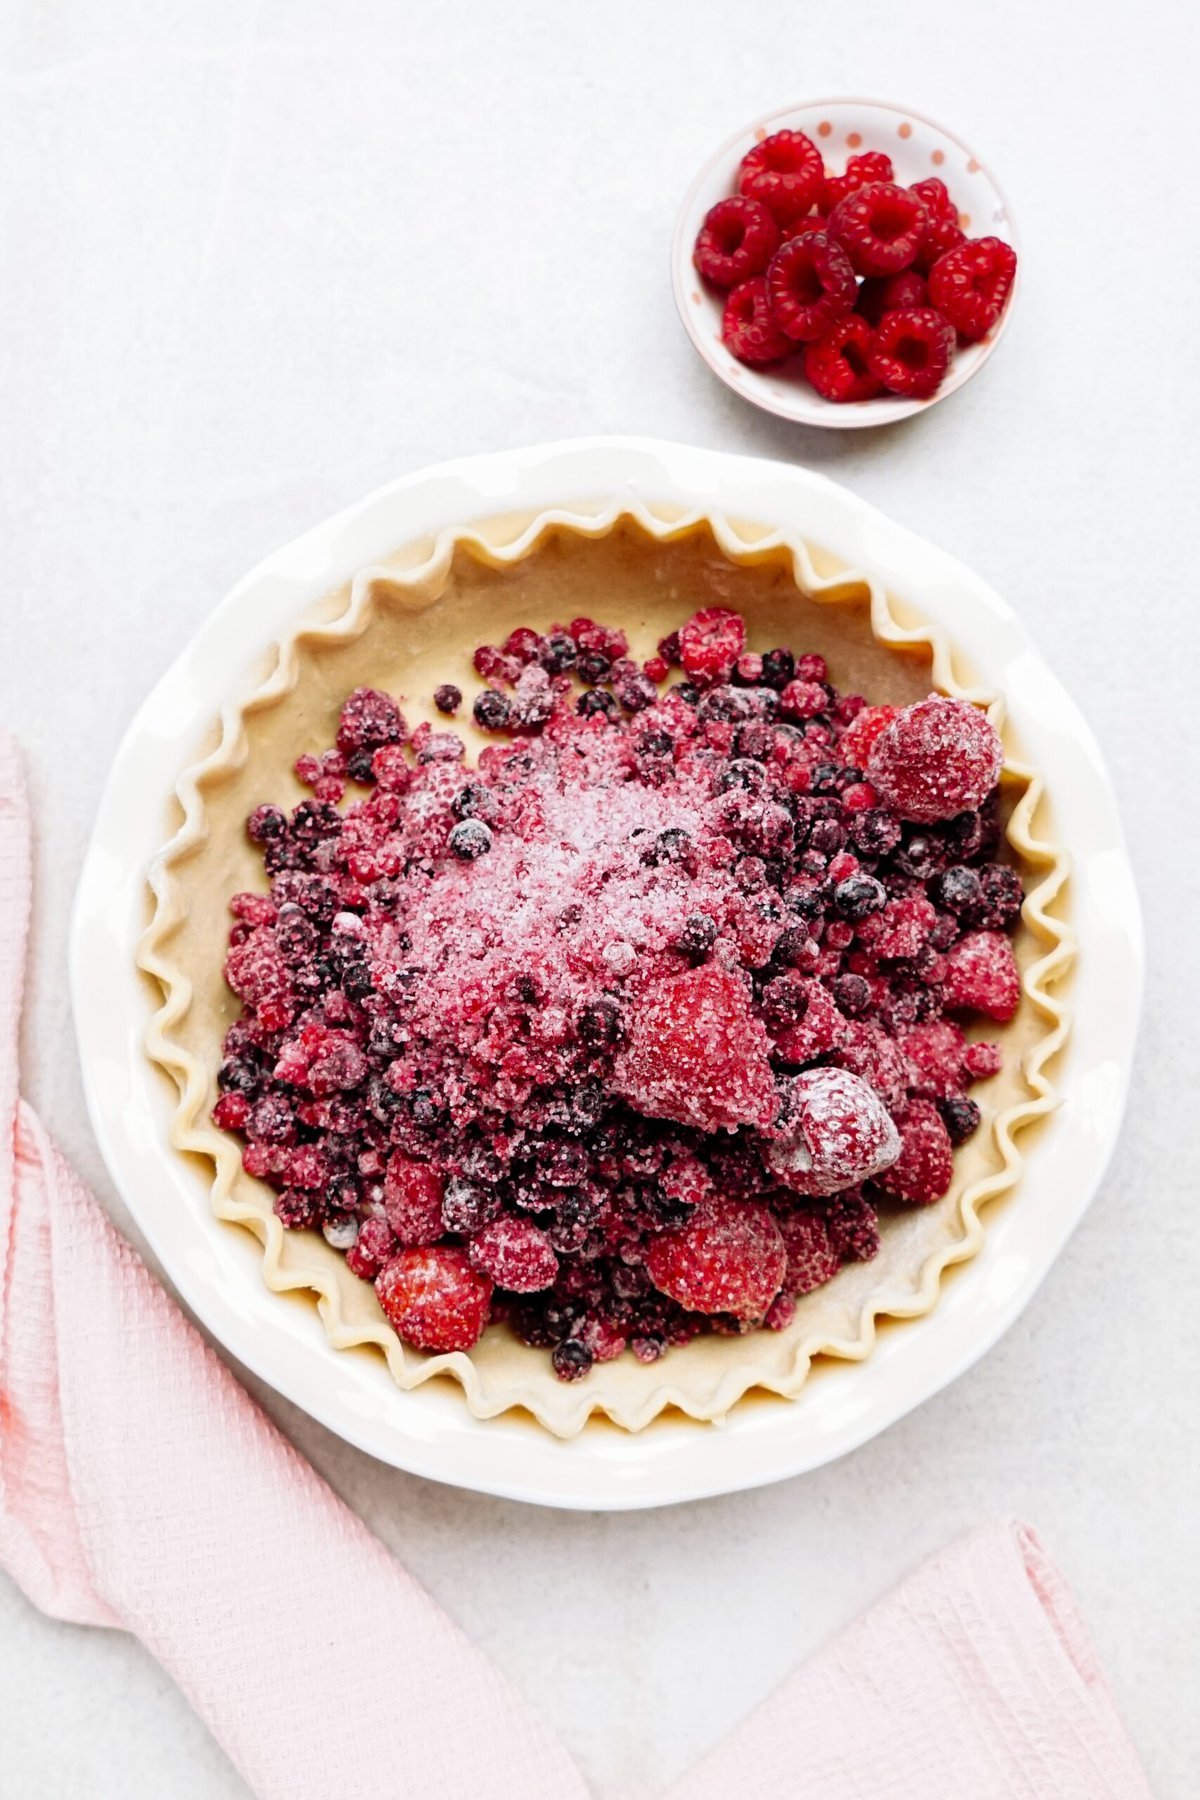 An unbaked pie crust filled with mixed berries and powdered sugar is placed in a white ceramic dish. A pink kitchen towel and a small bowl of raspberries are nearby.